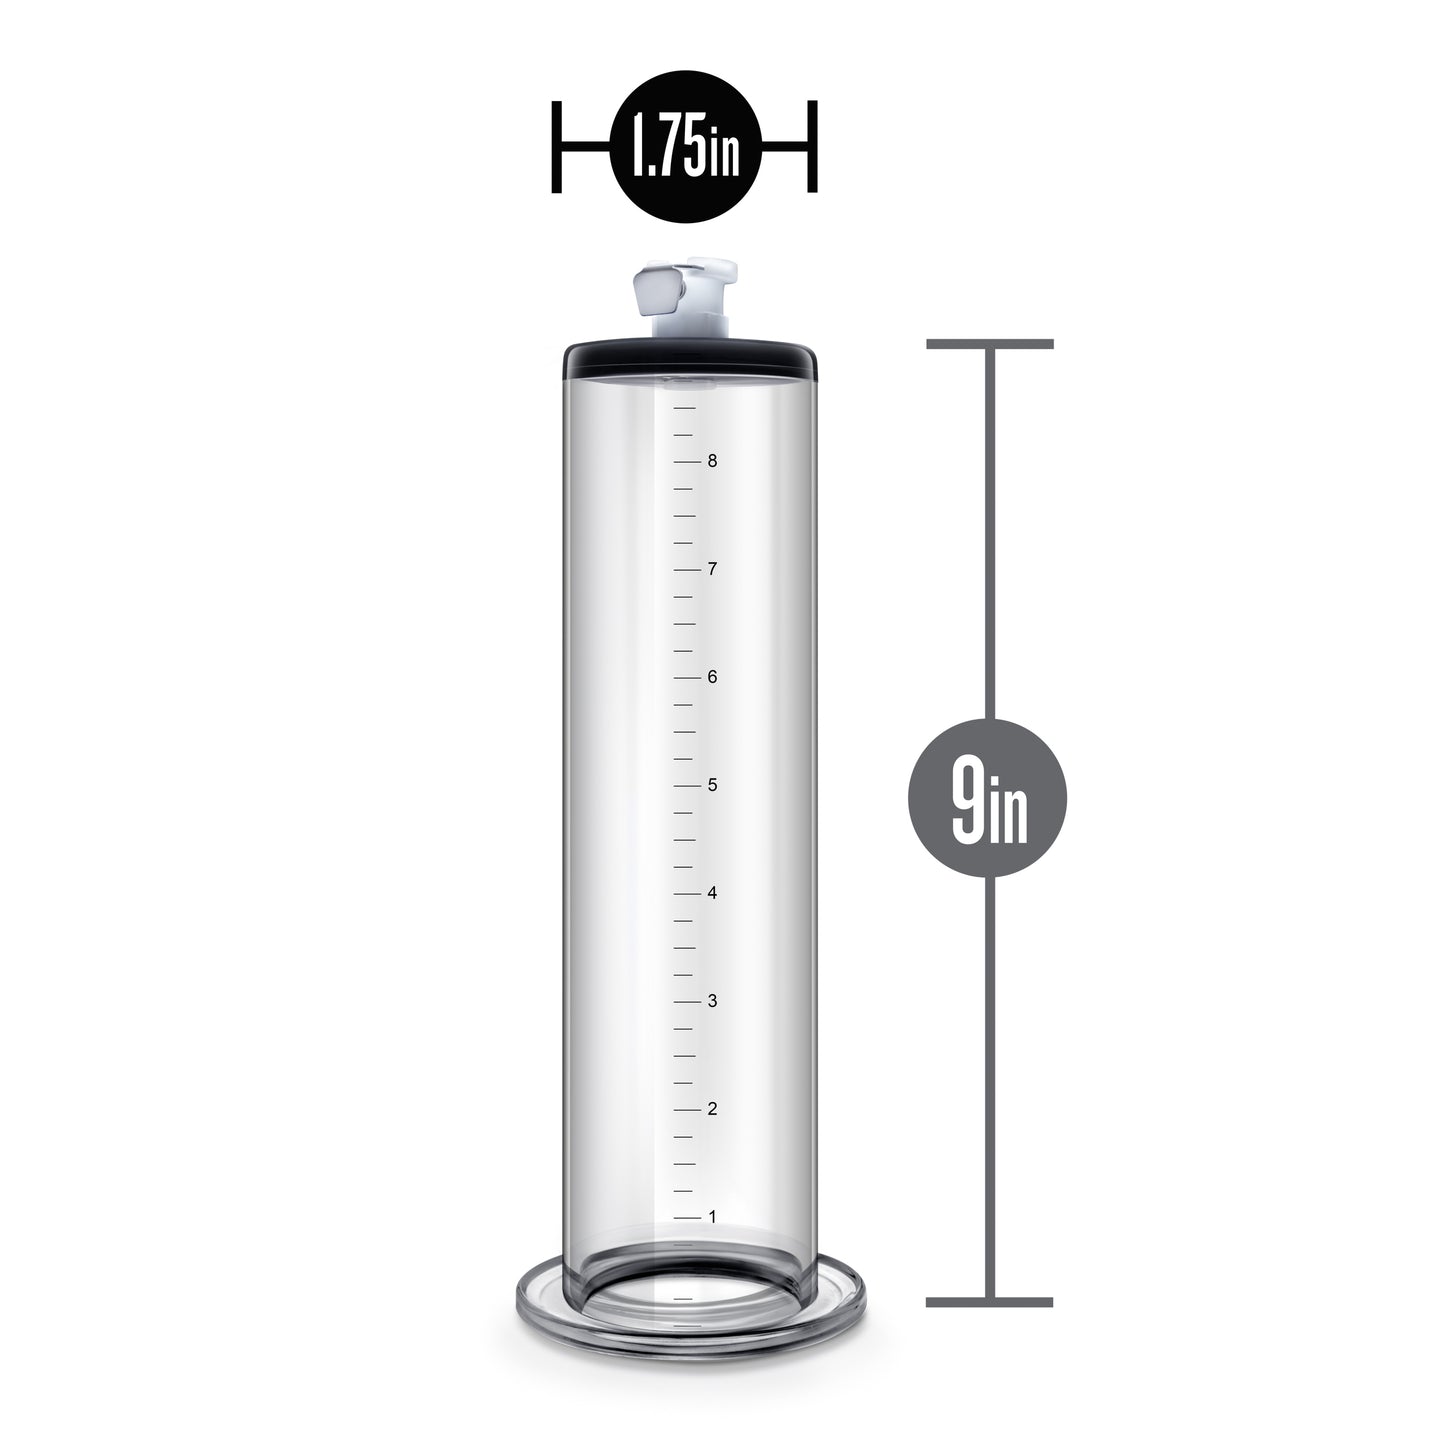 Performance - 9 Inch X 1.75 Inch Penis Pump  Cylinder  Clear